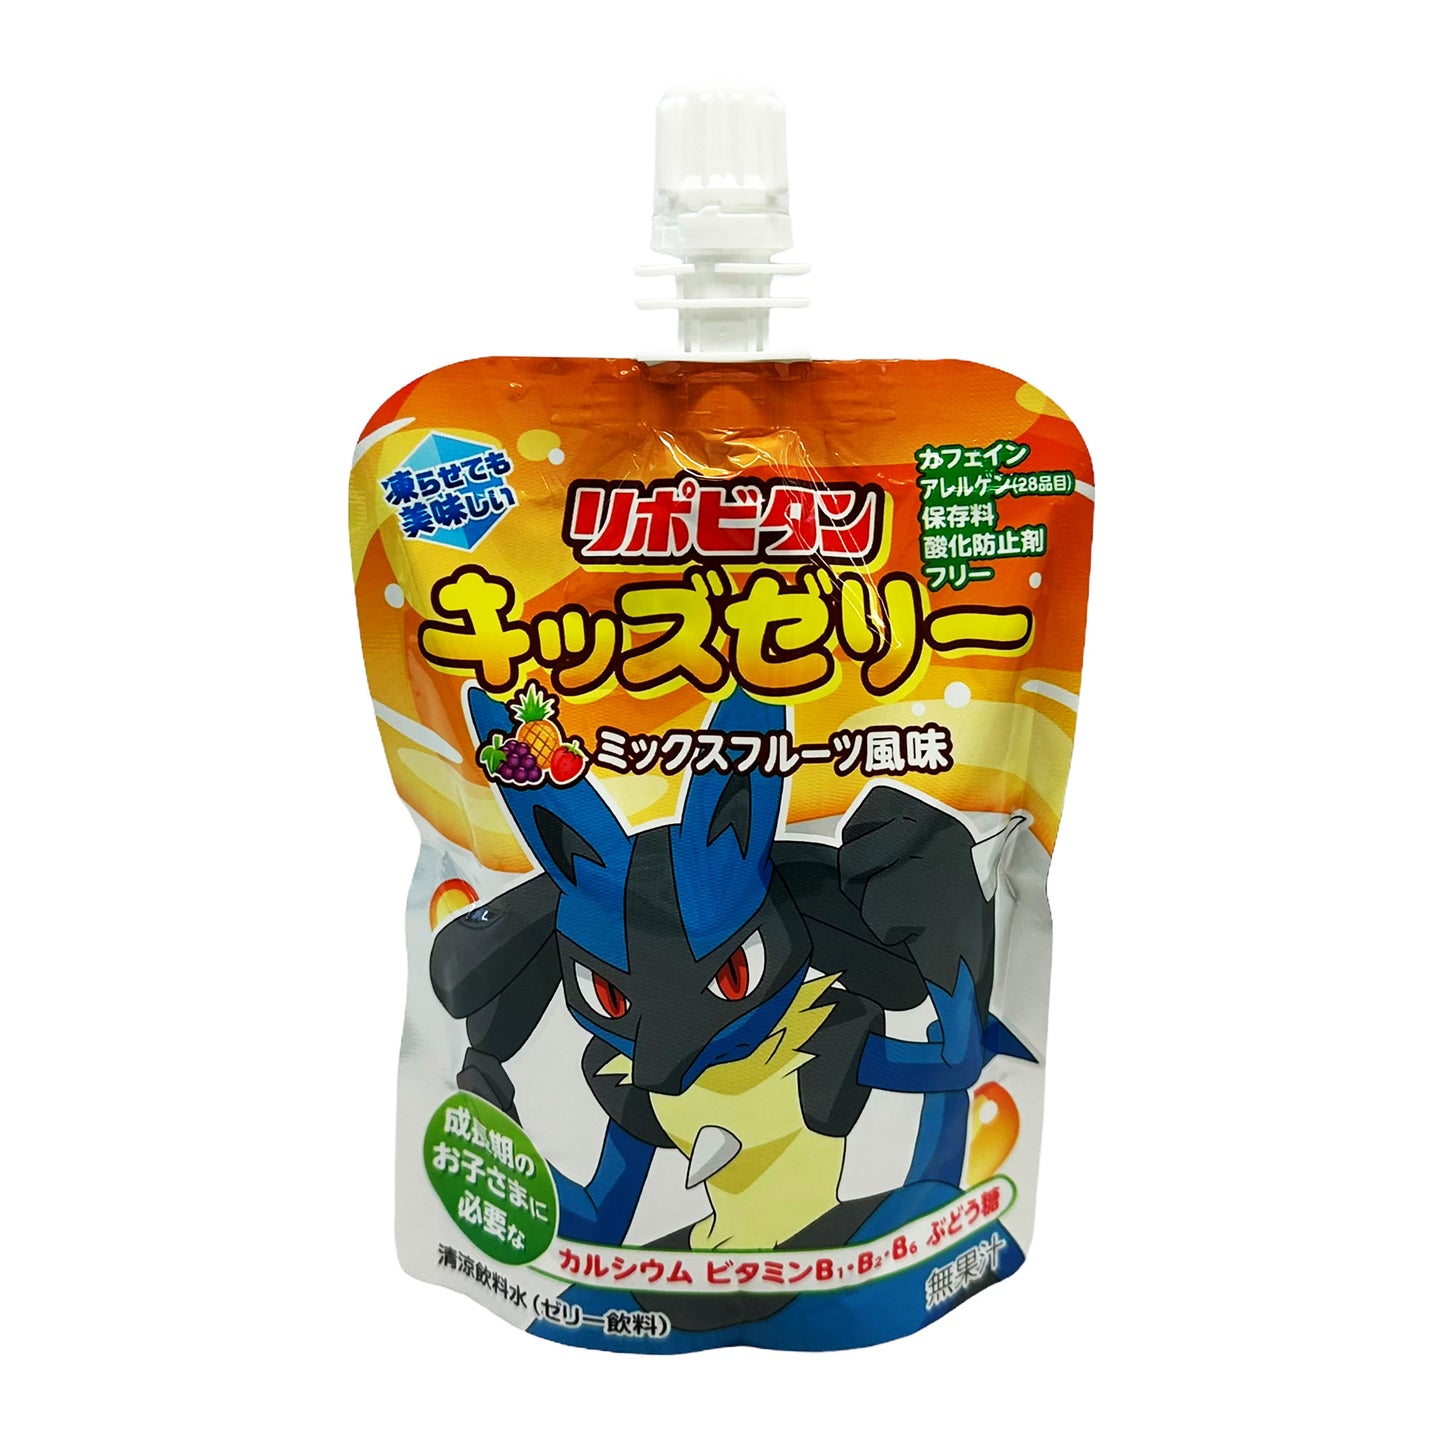 Front graphic image 3 of Taisho Pokemon Jelly Drink - Mixed Fruits 4.4oz (125g)